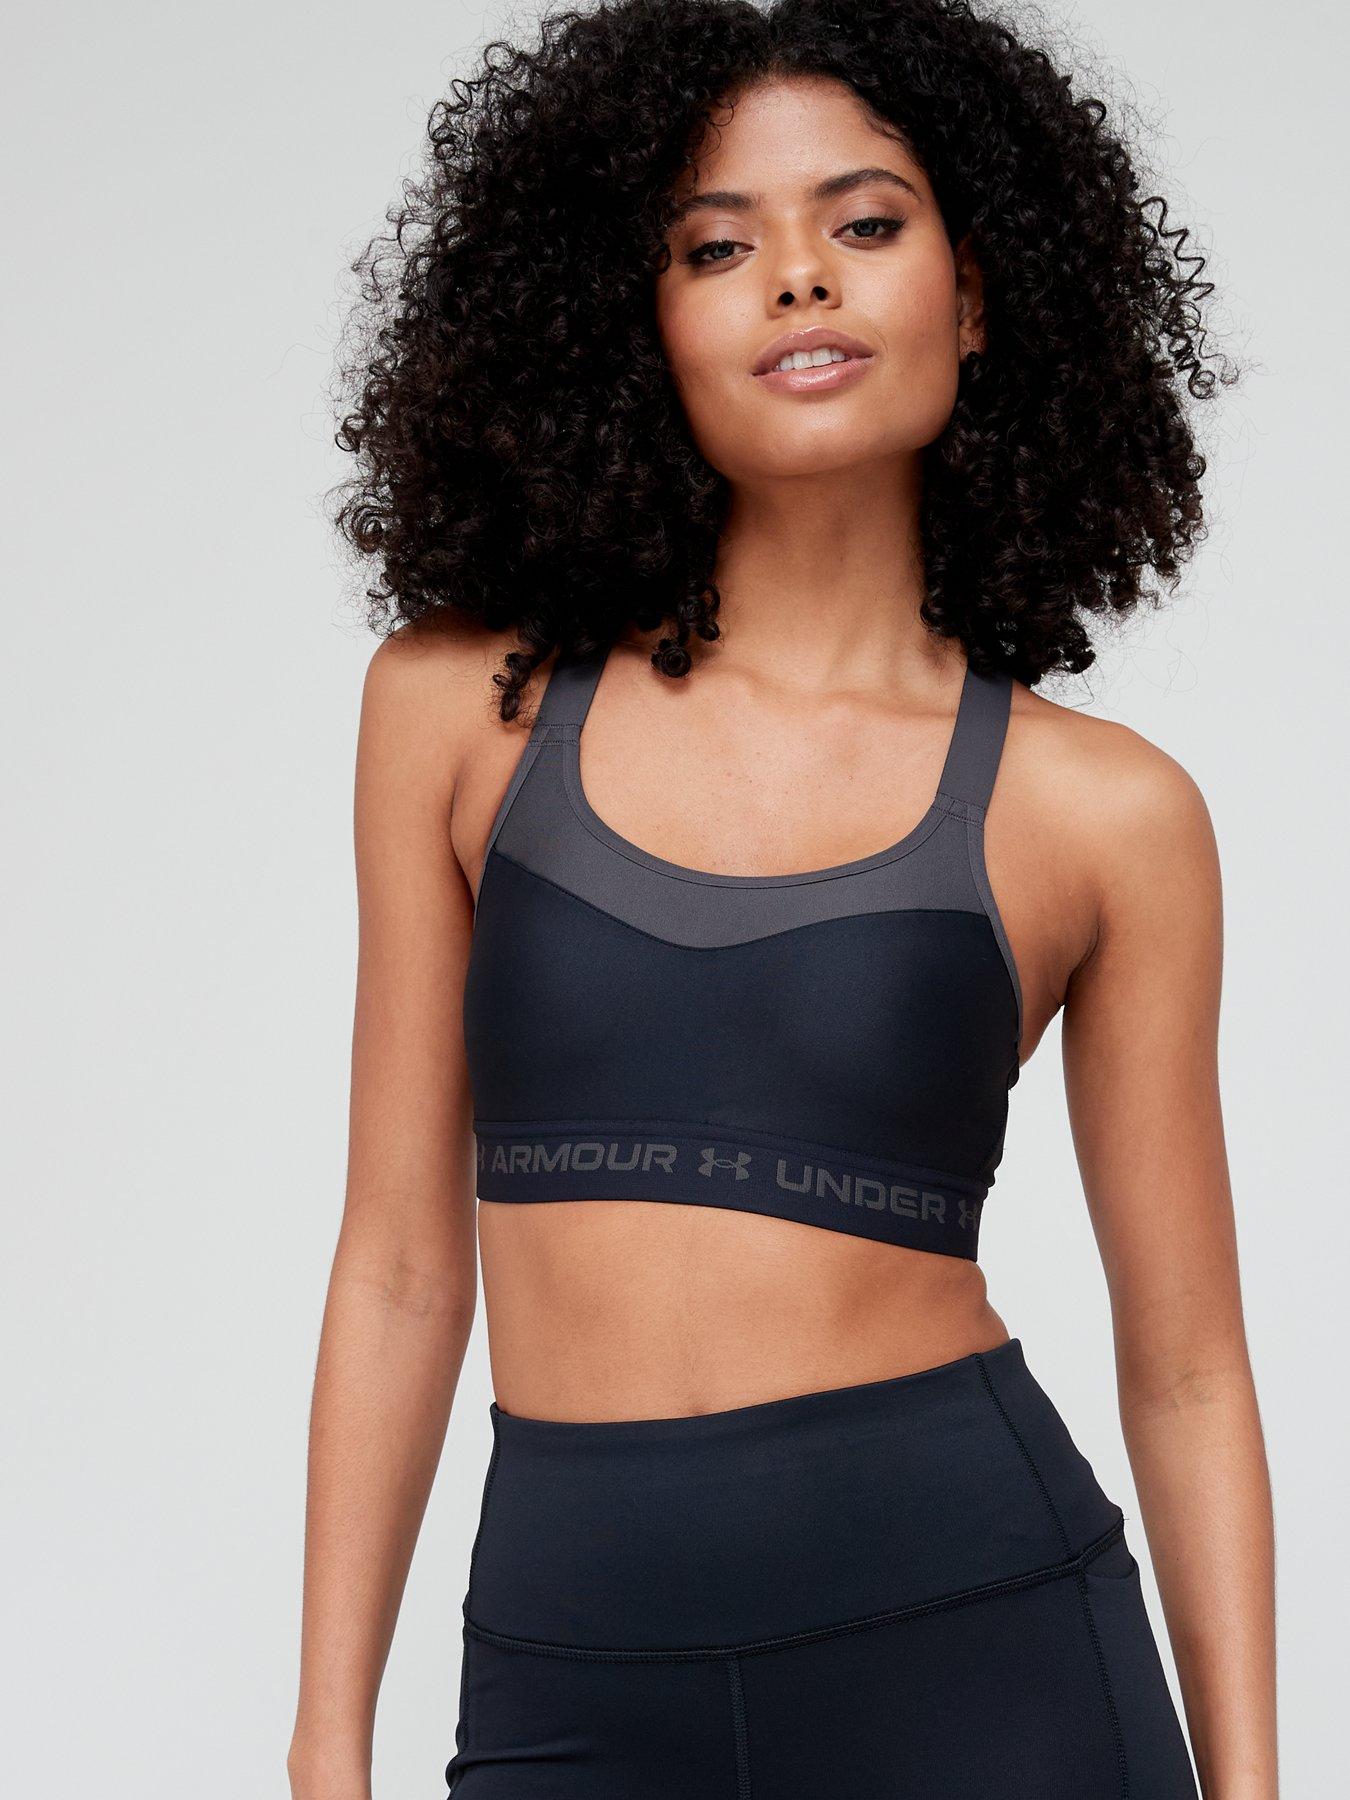 super supportive underarmor bra for high intensity workouts